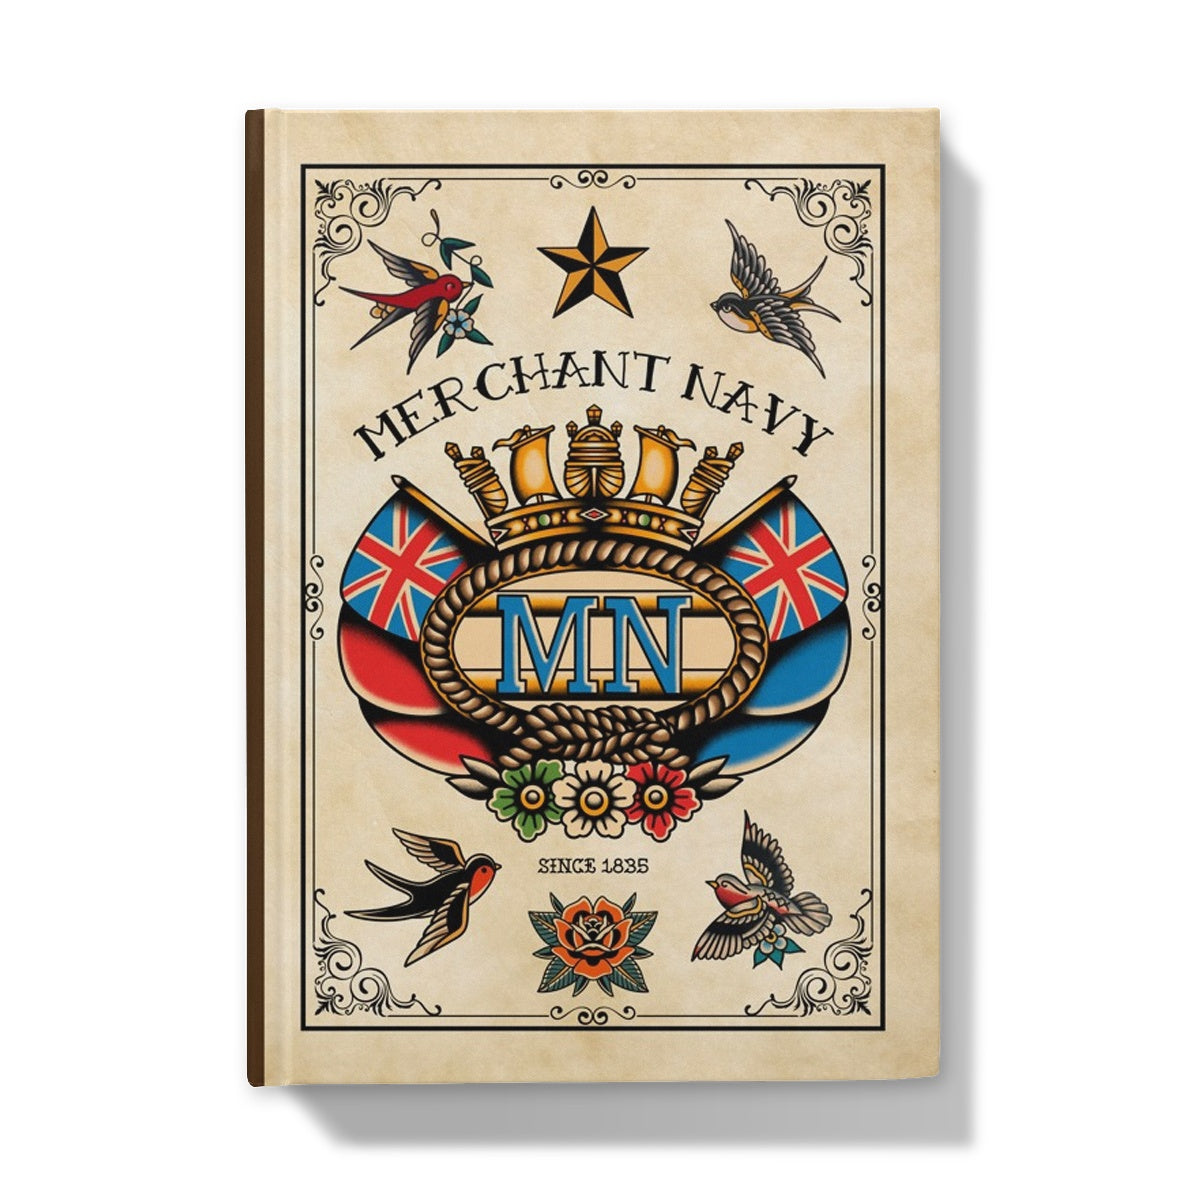 Hardback Notebook (Vintage style sailor tattoo inspired Merchant Navy badge and swallows)